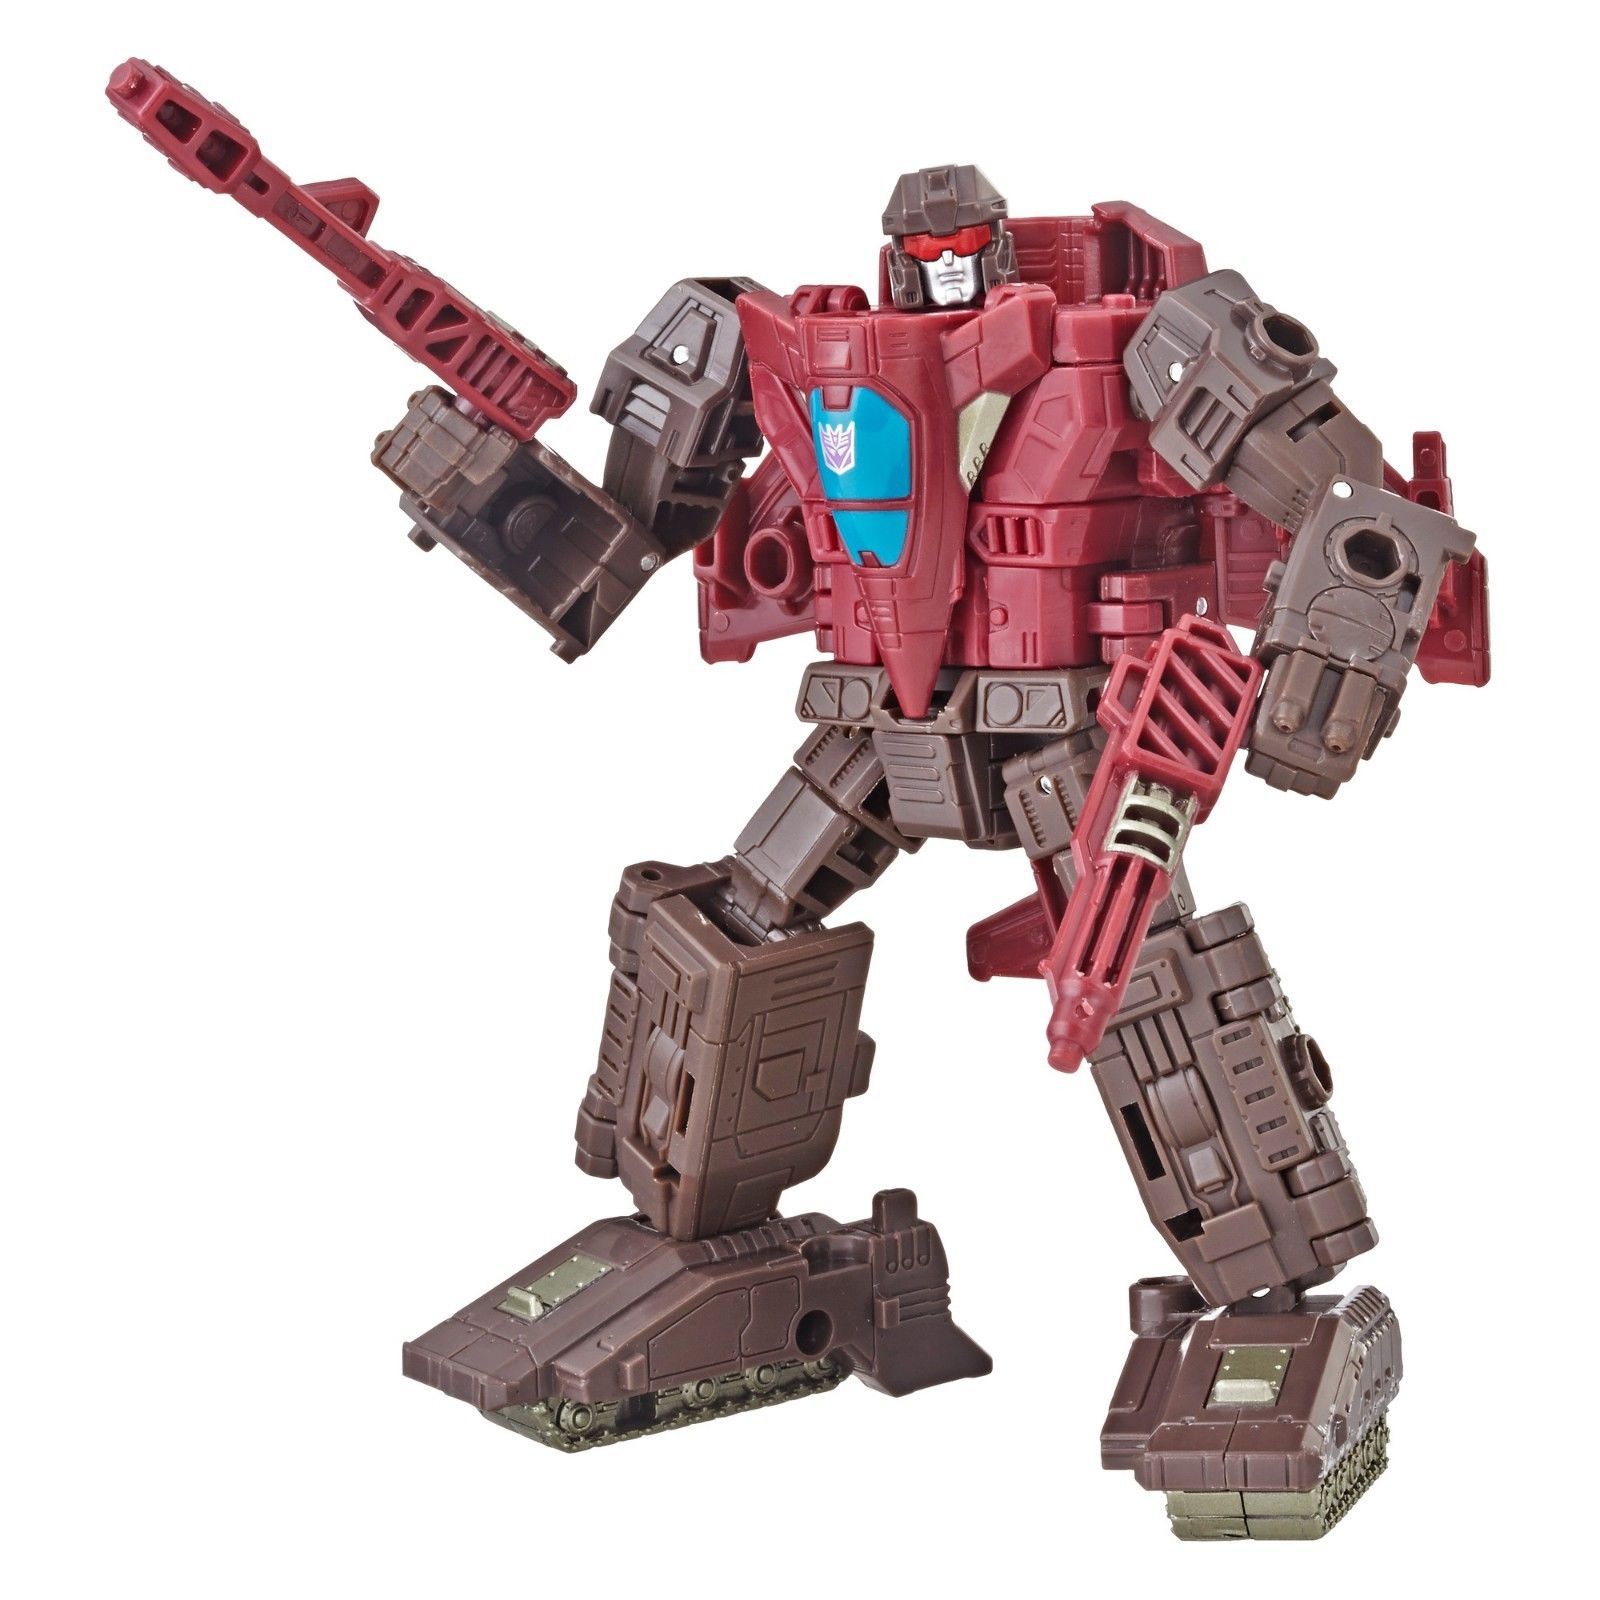 Transformers Generations War For Cybertron: Siege Deluxe Skytread Action Figure WFC-S10